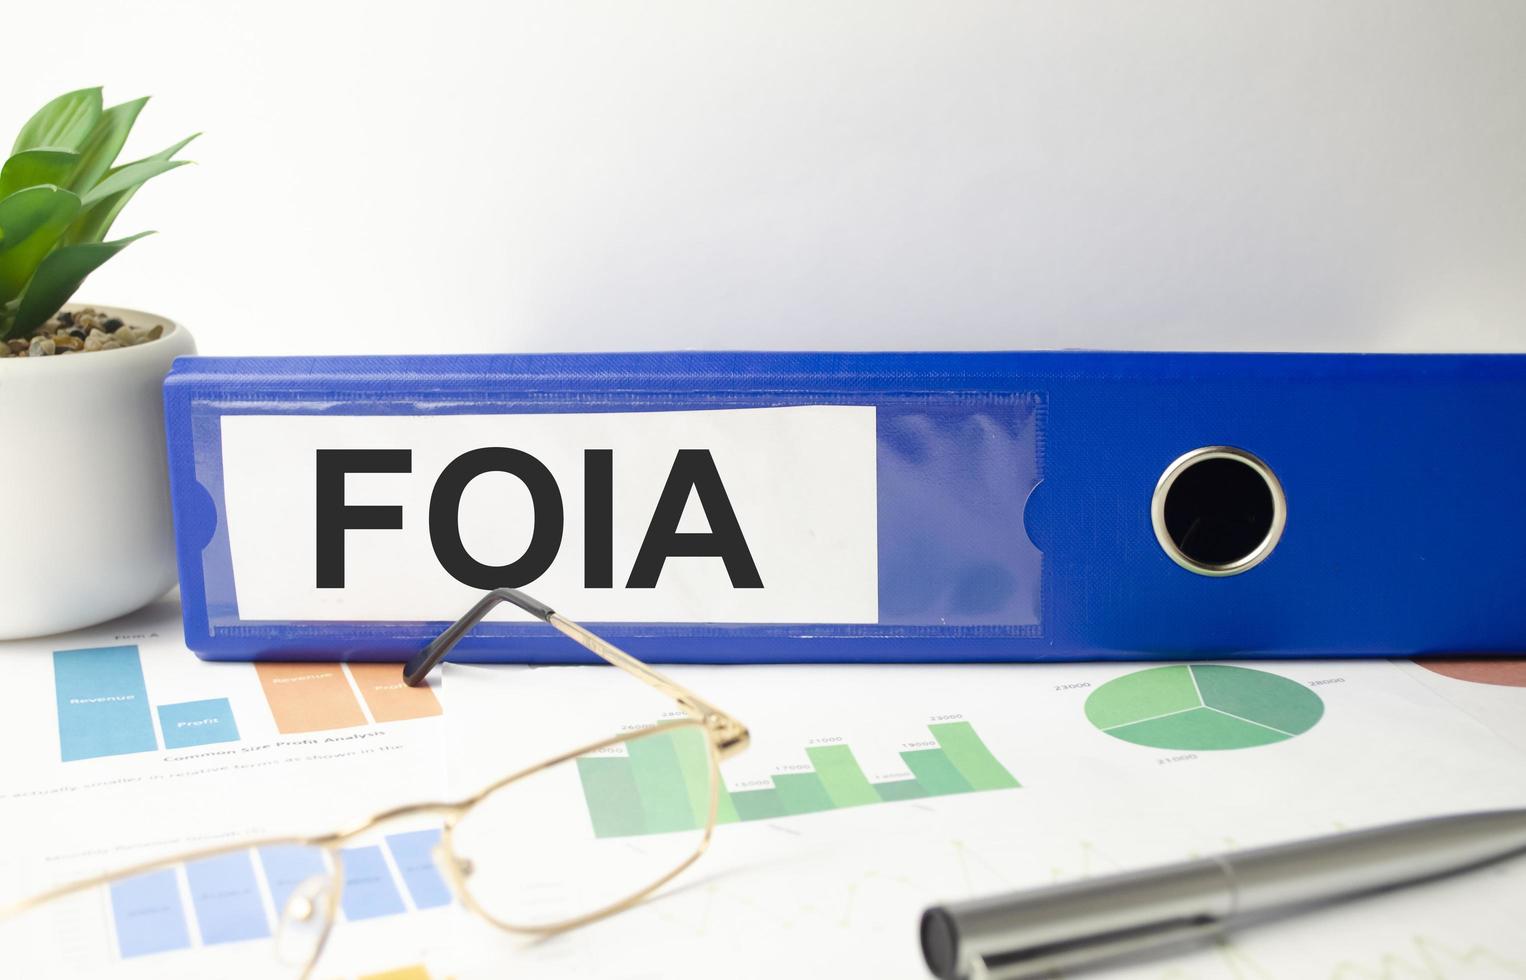 FOIA. On white stickers. Business concept image. photo